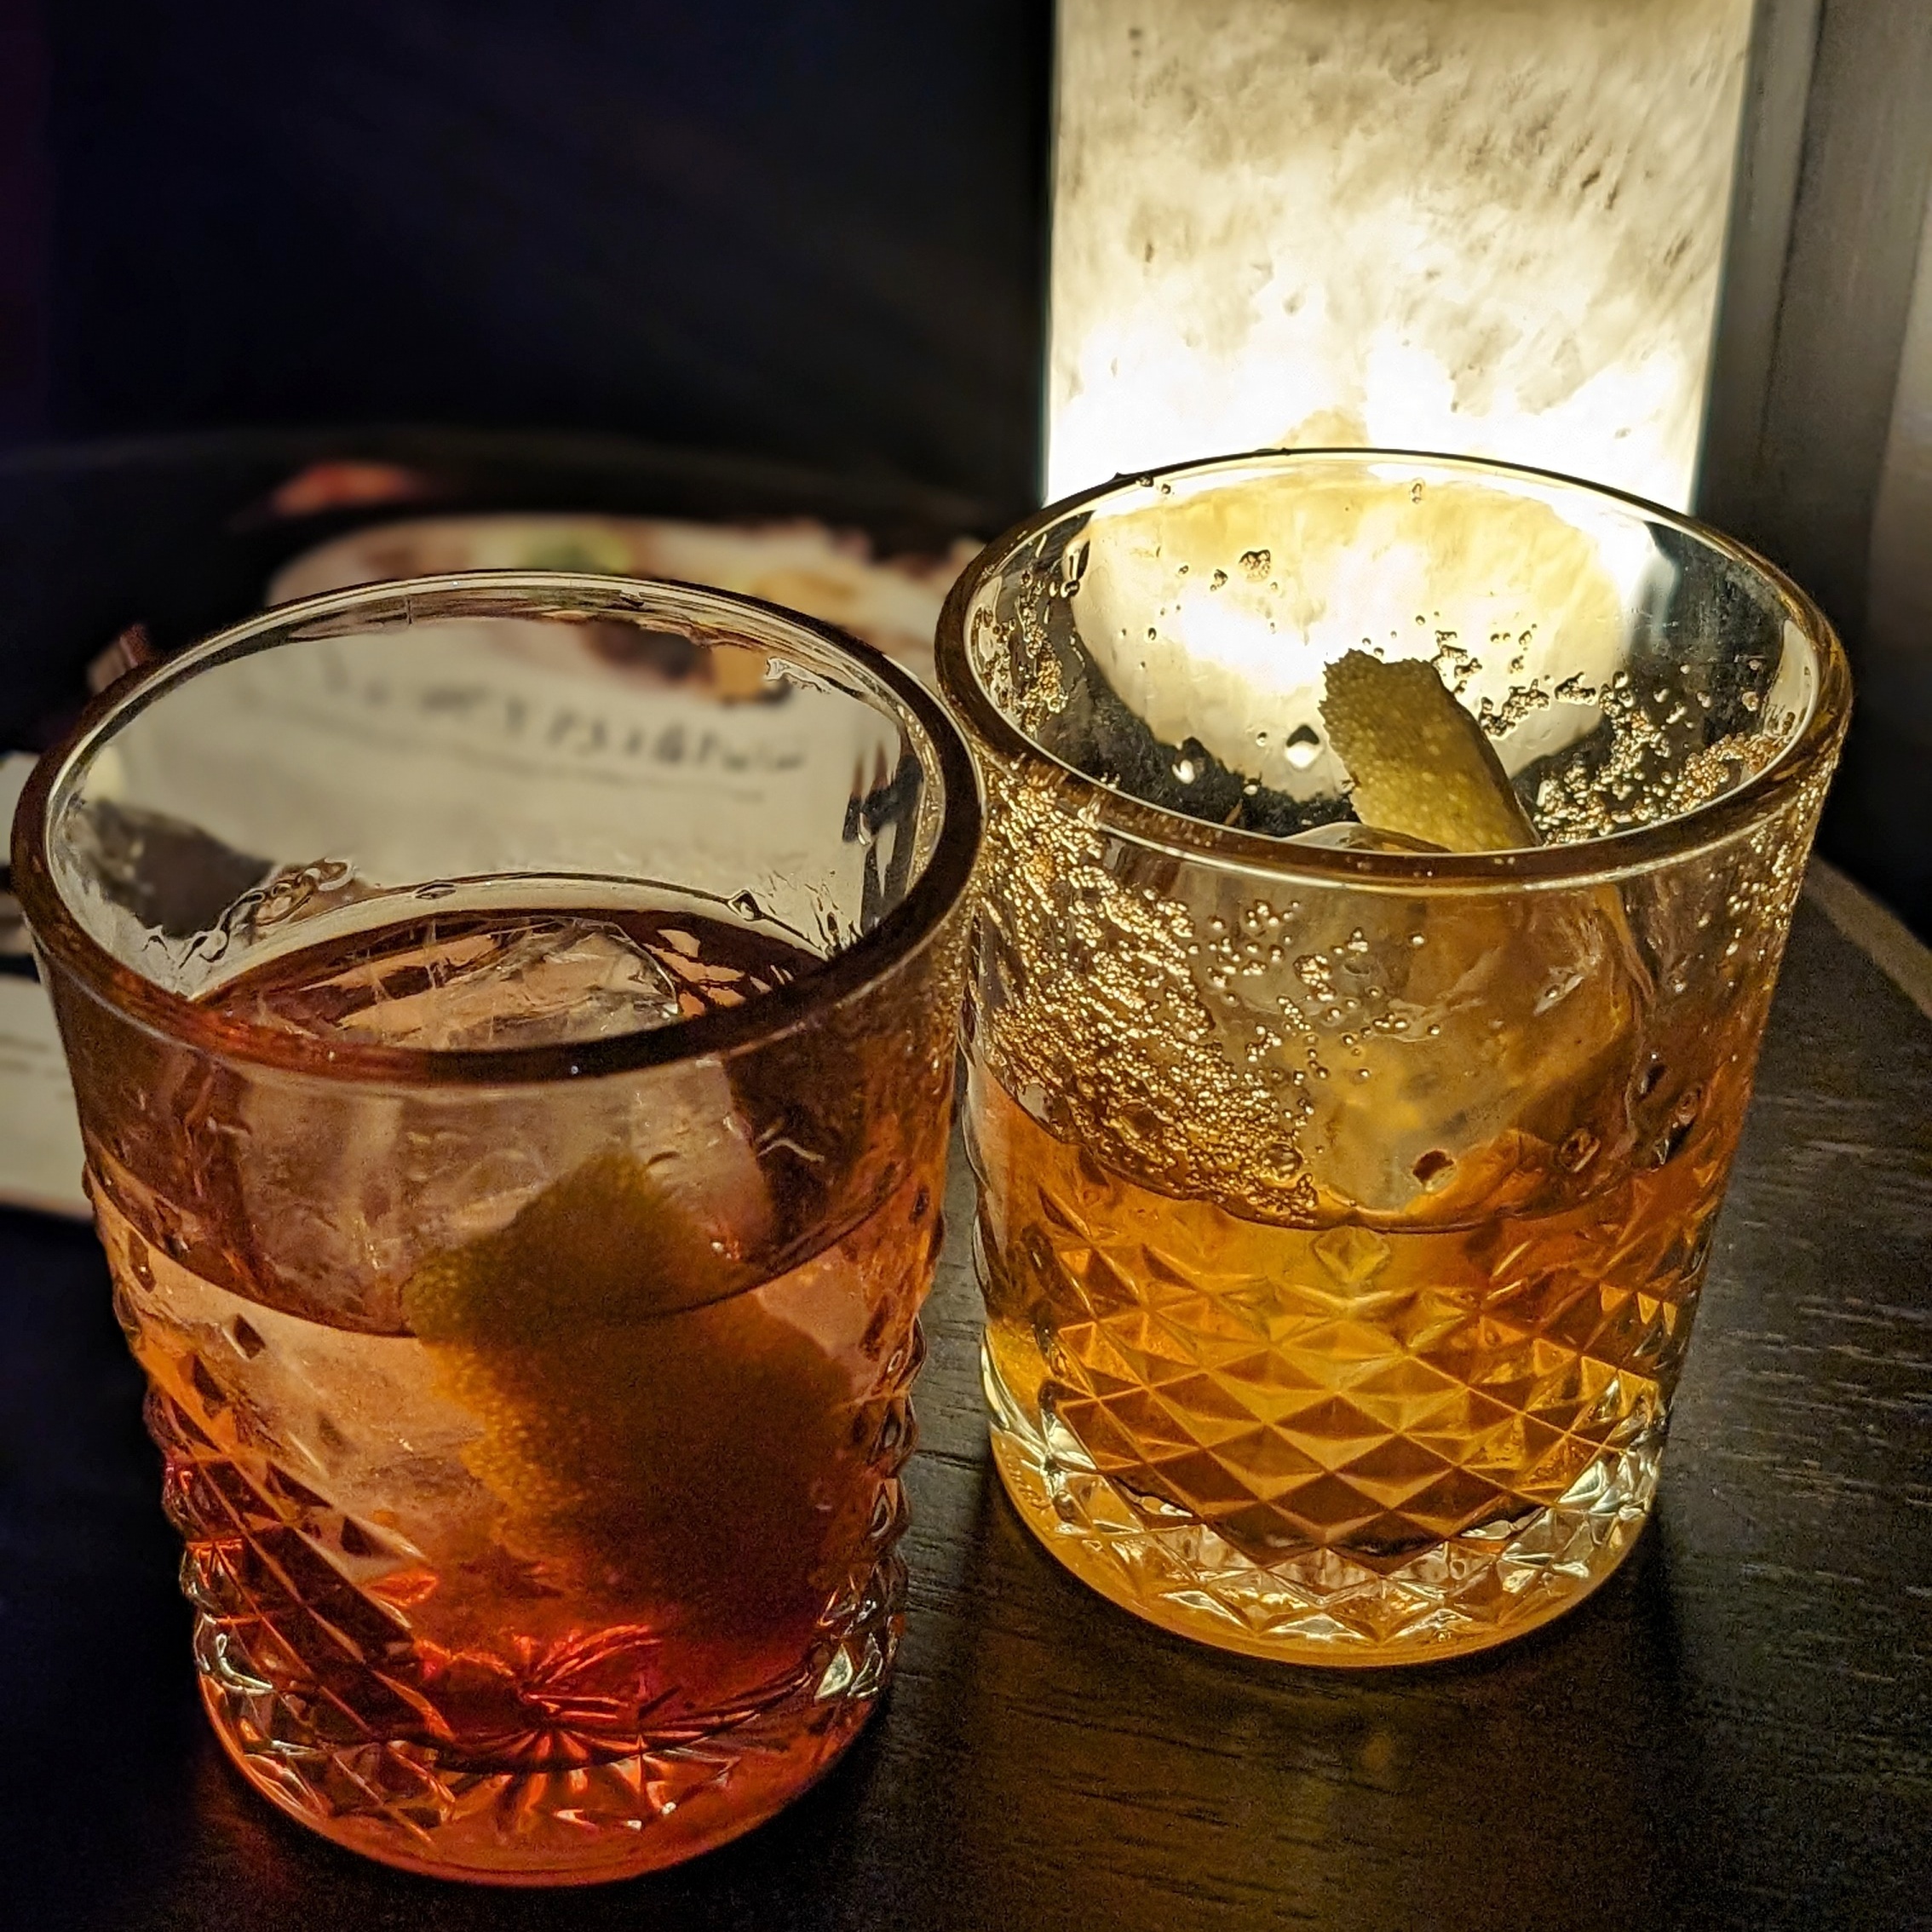 InterContinental Khao Yai Resort Papillon Negroni and Old Fashioned Cocktails,